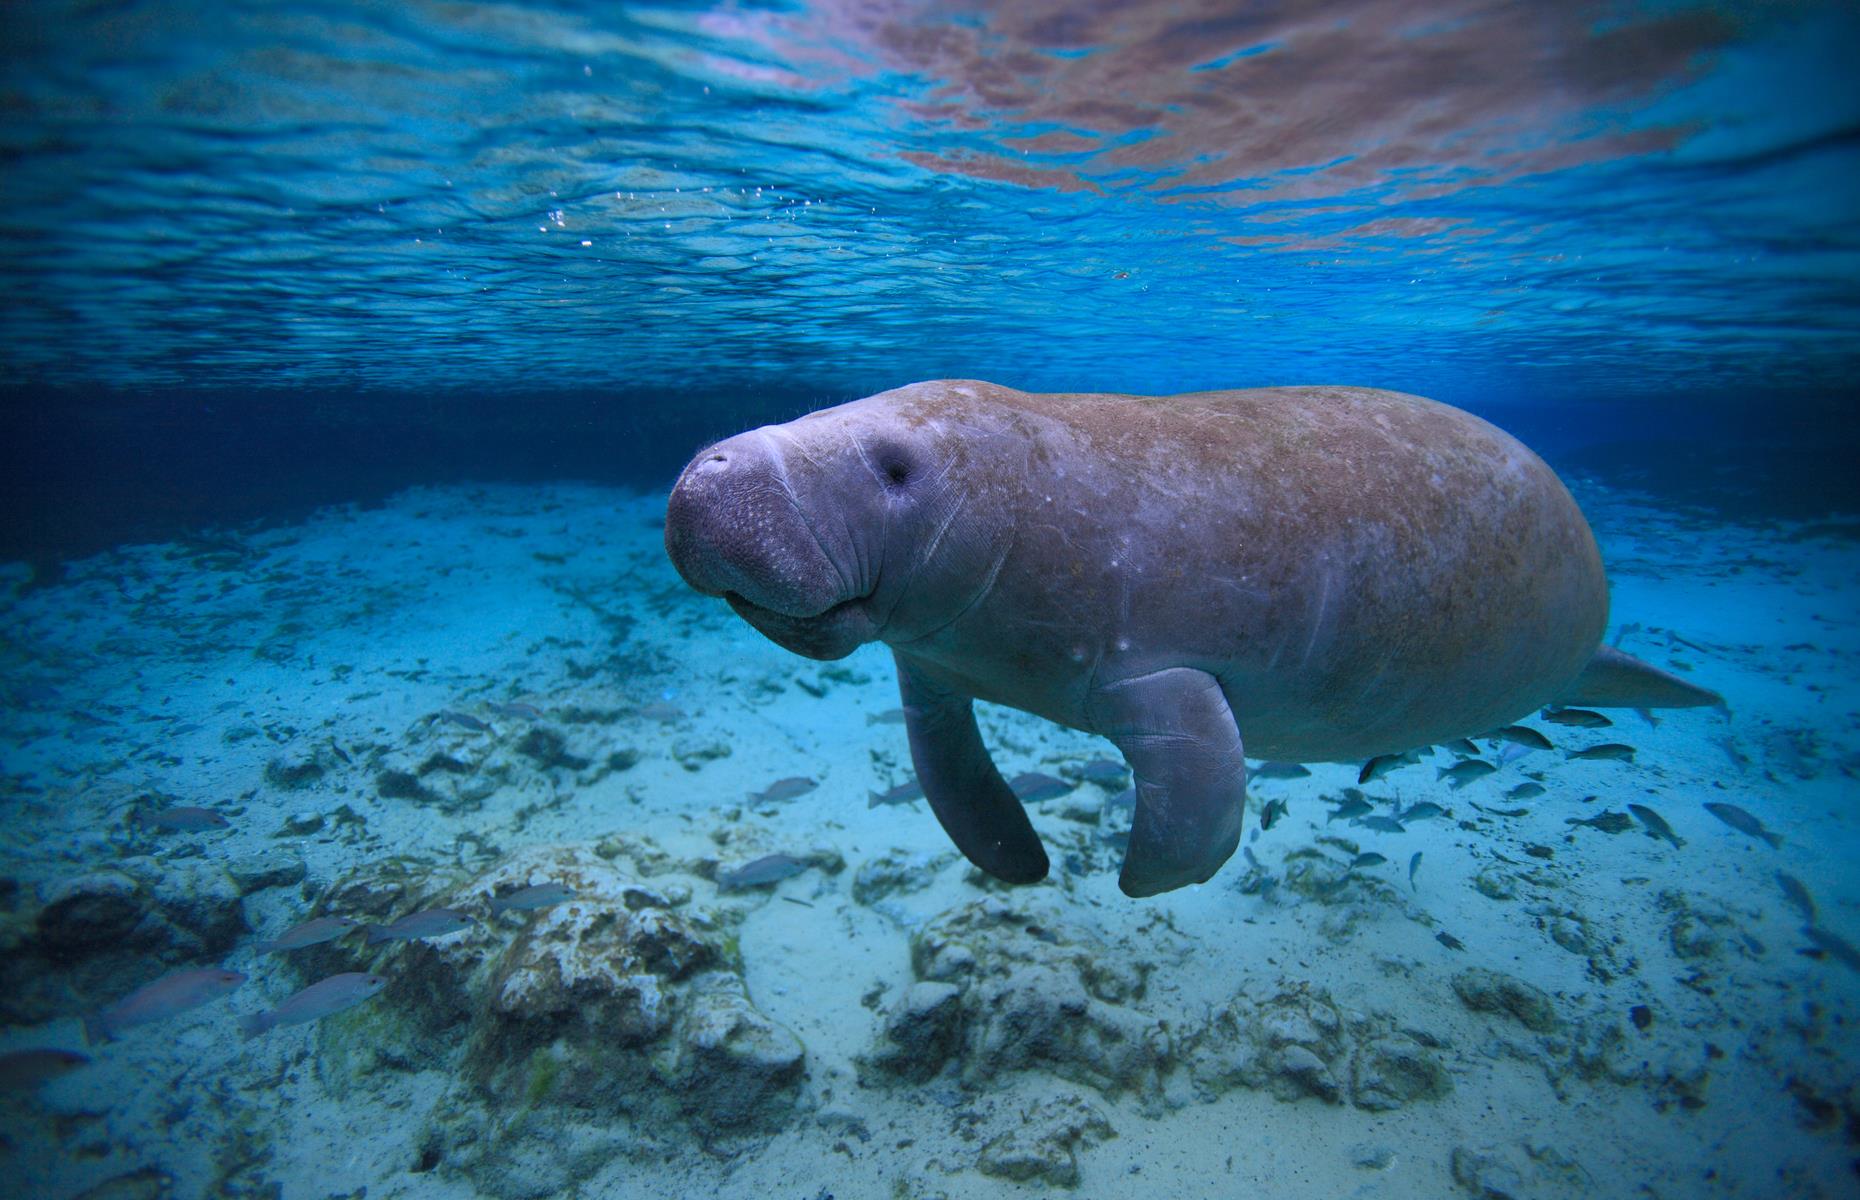 <p>Crystal River in northern Florida is the only place in North America where you can legally swim with the bizarre-looking manatees, which were once thought to be mermaids (<a href="https://www.history.com/this-day-in-history/columbus-mistakes-manatees-for-mermaids">Christopher Columbus recorded</a> plenty of ‘mermaid’ sightings in his 15th-century ship’s logs). </p>  <p><a href="https://www.loveexploring.com/galleries/111338/amazing-wild-animals-you-can-see-in-americas-national-parks?page=1"><strong>Amazing animals you can see in America's national parks</strong></a></p>